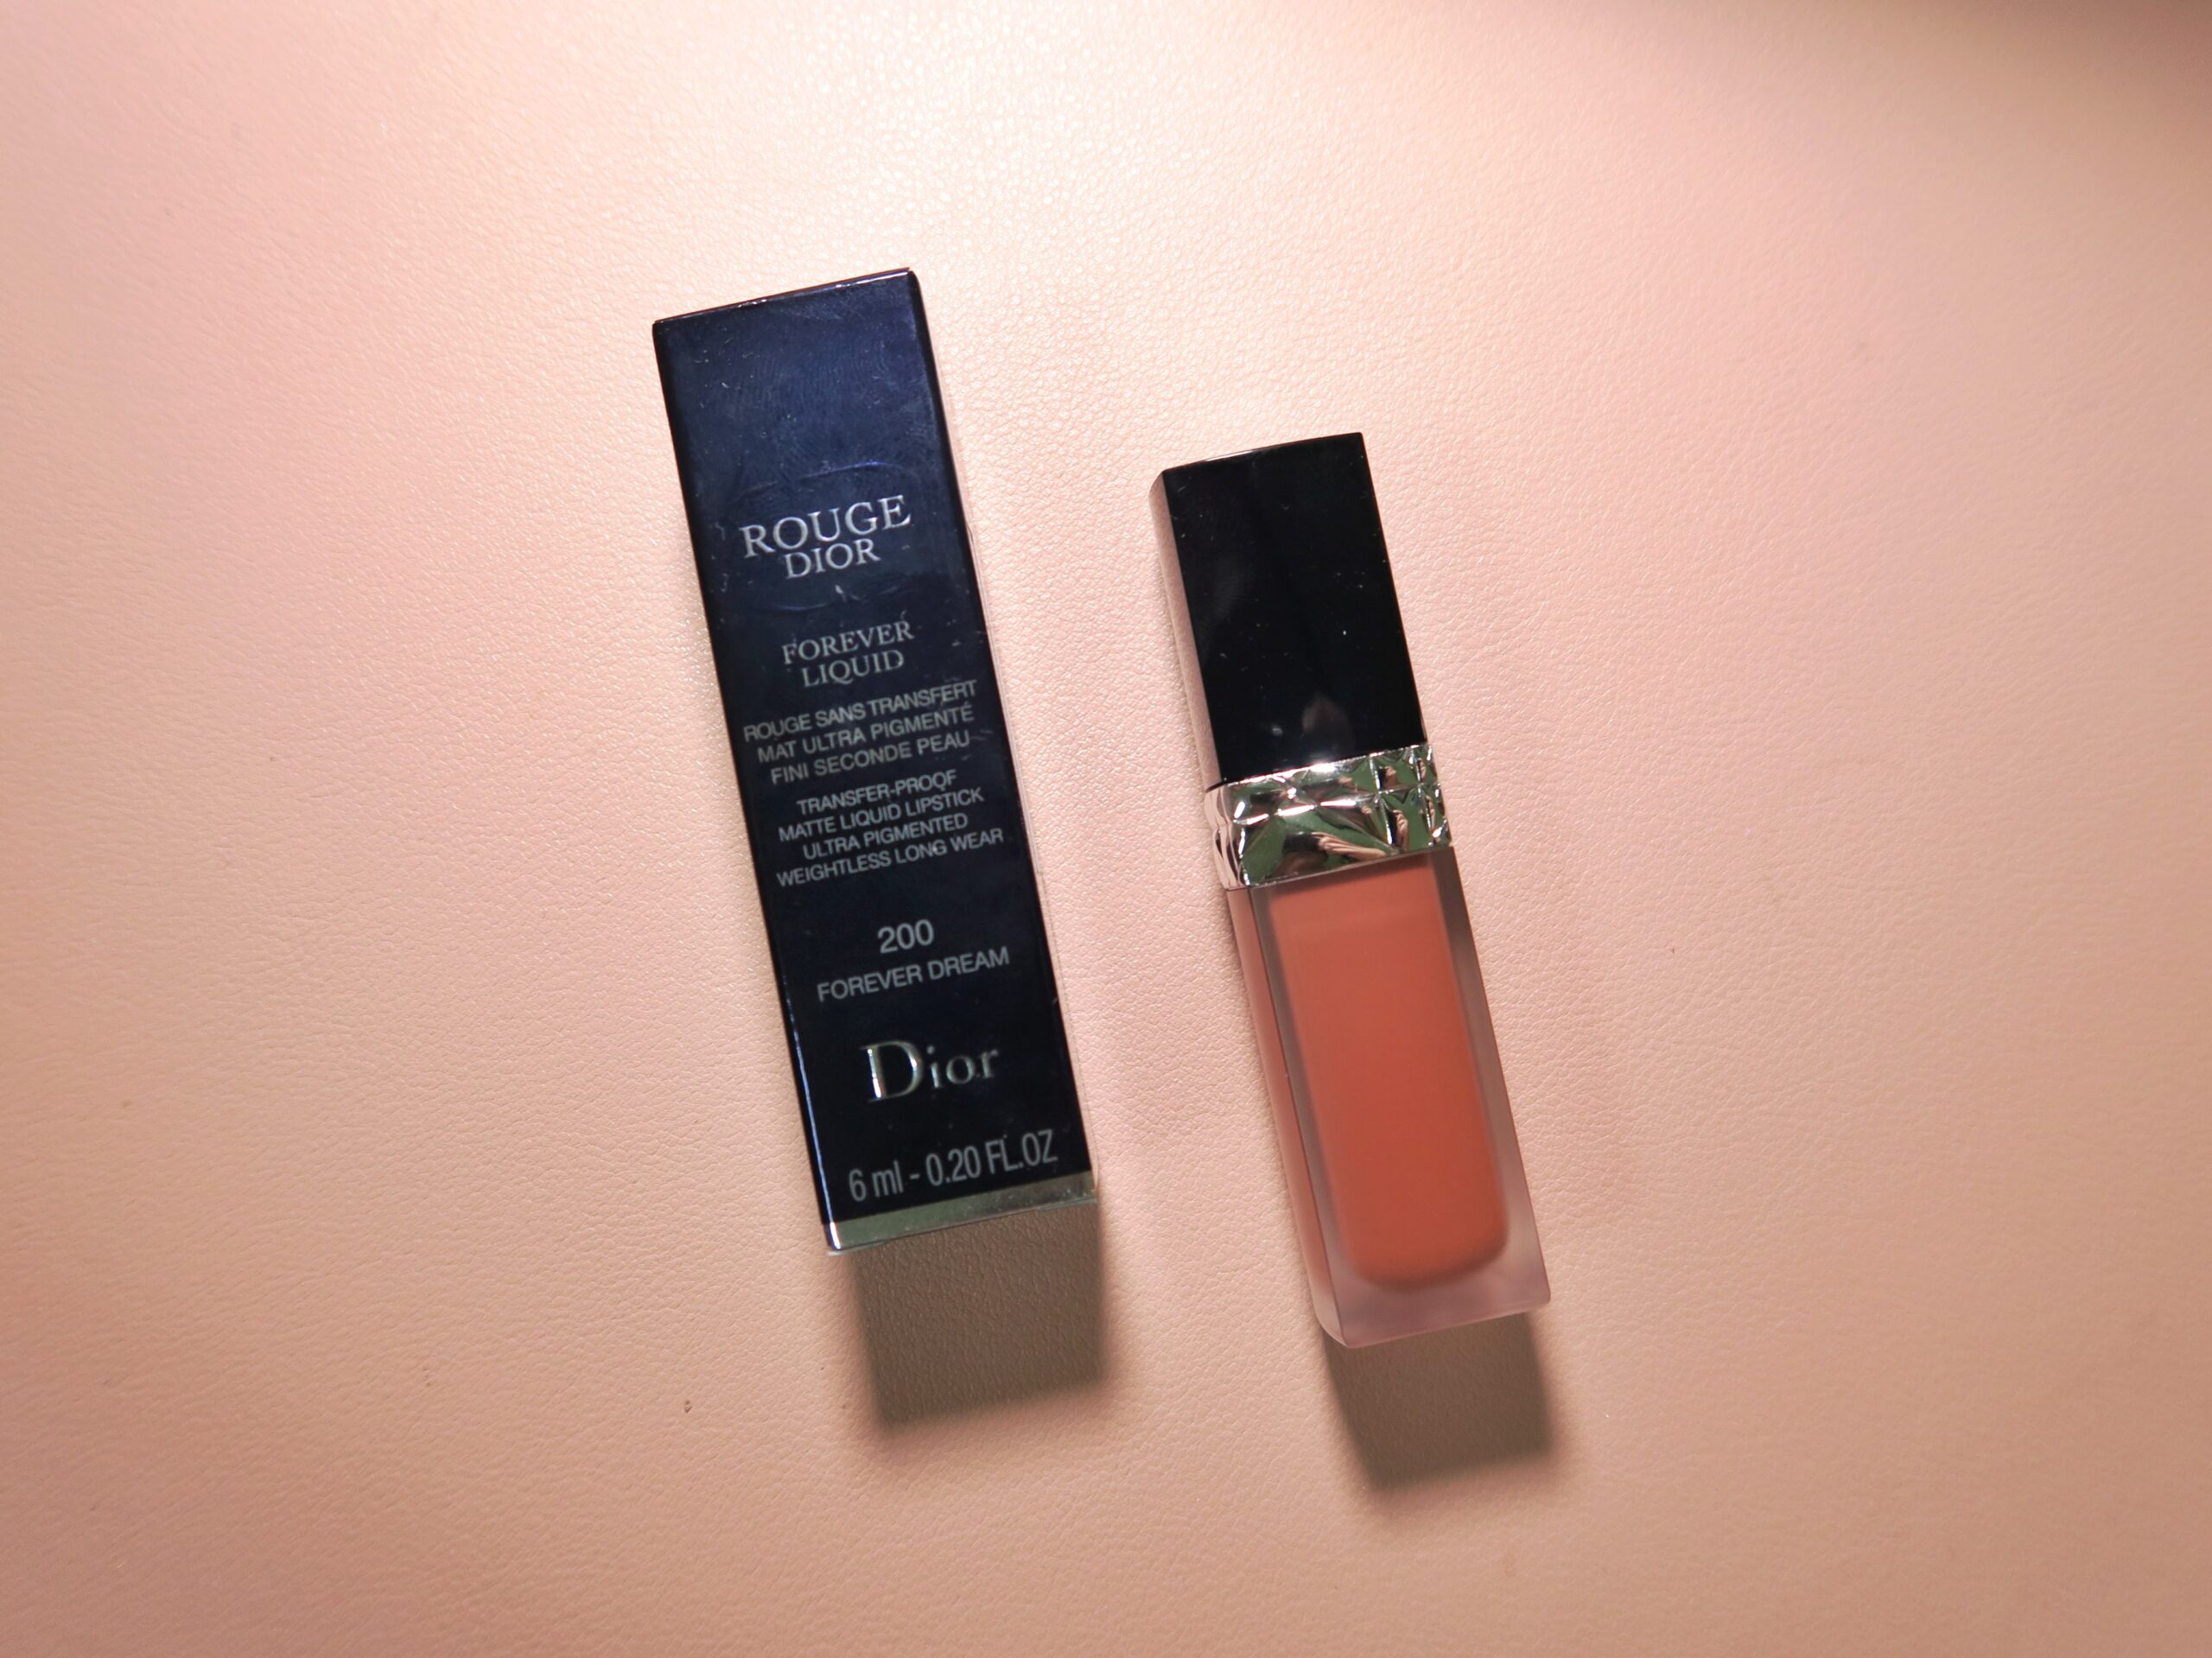 Review: Rouge Dior Forever Liquid 200 Forever Dream